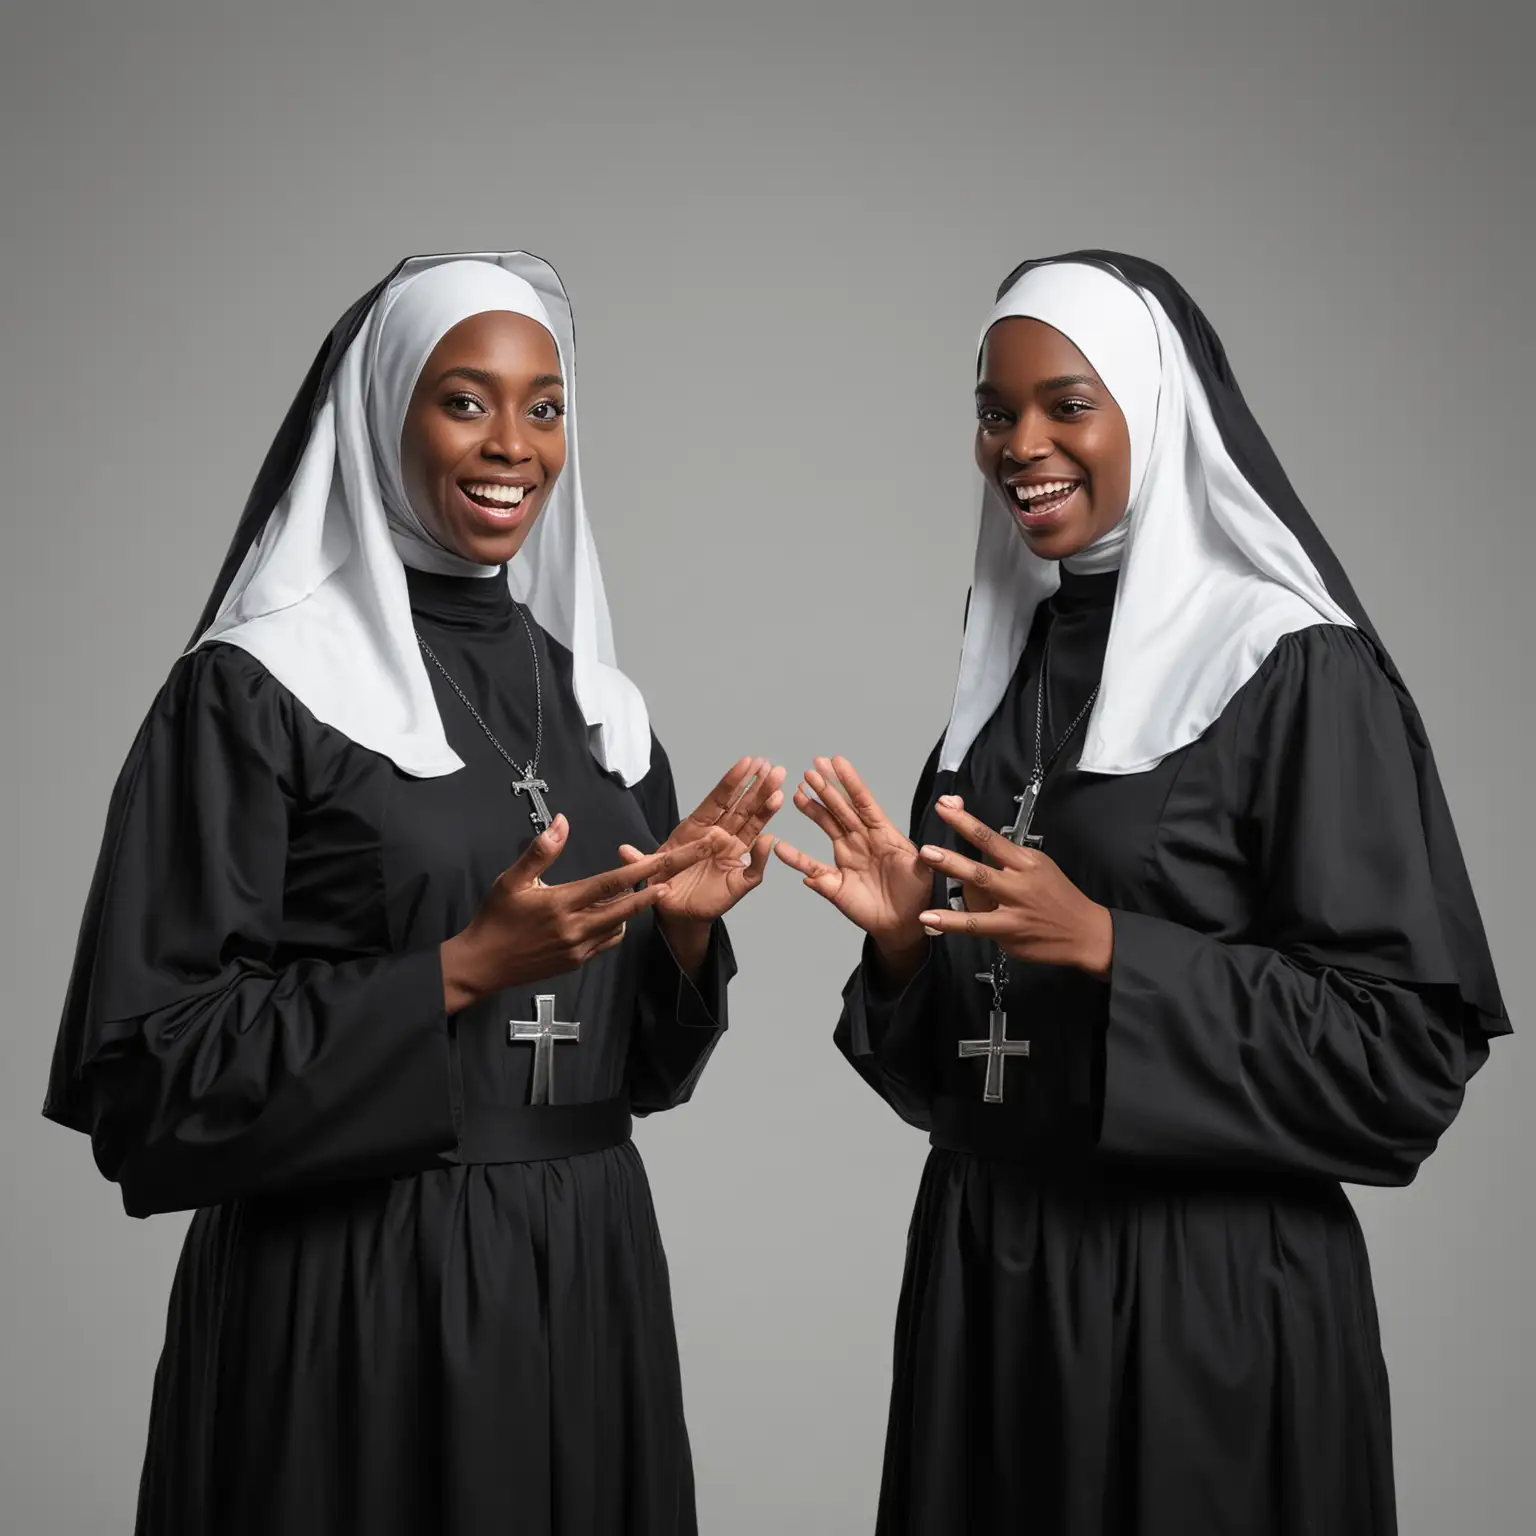 Two-Black-Nuns-Engaged-in-Discussion-on-Transparent-Background